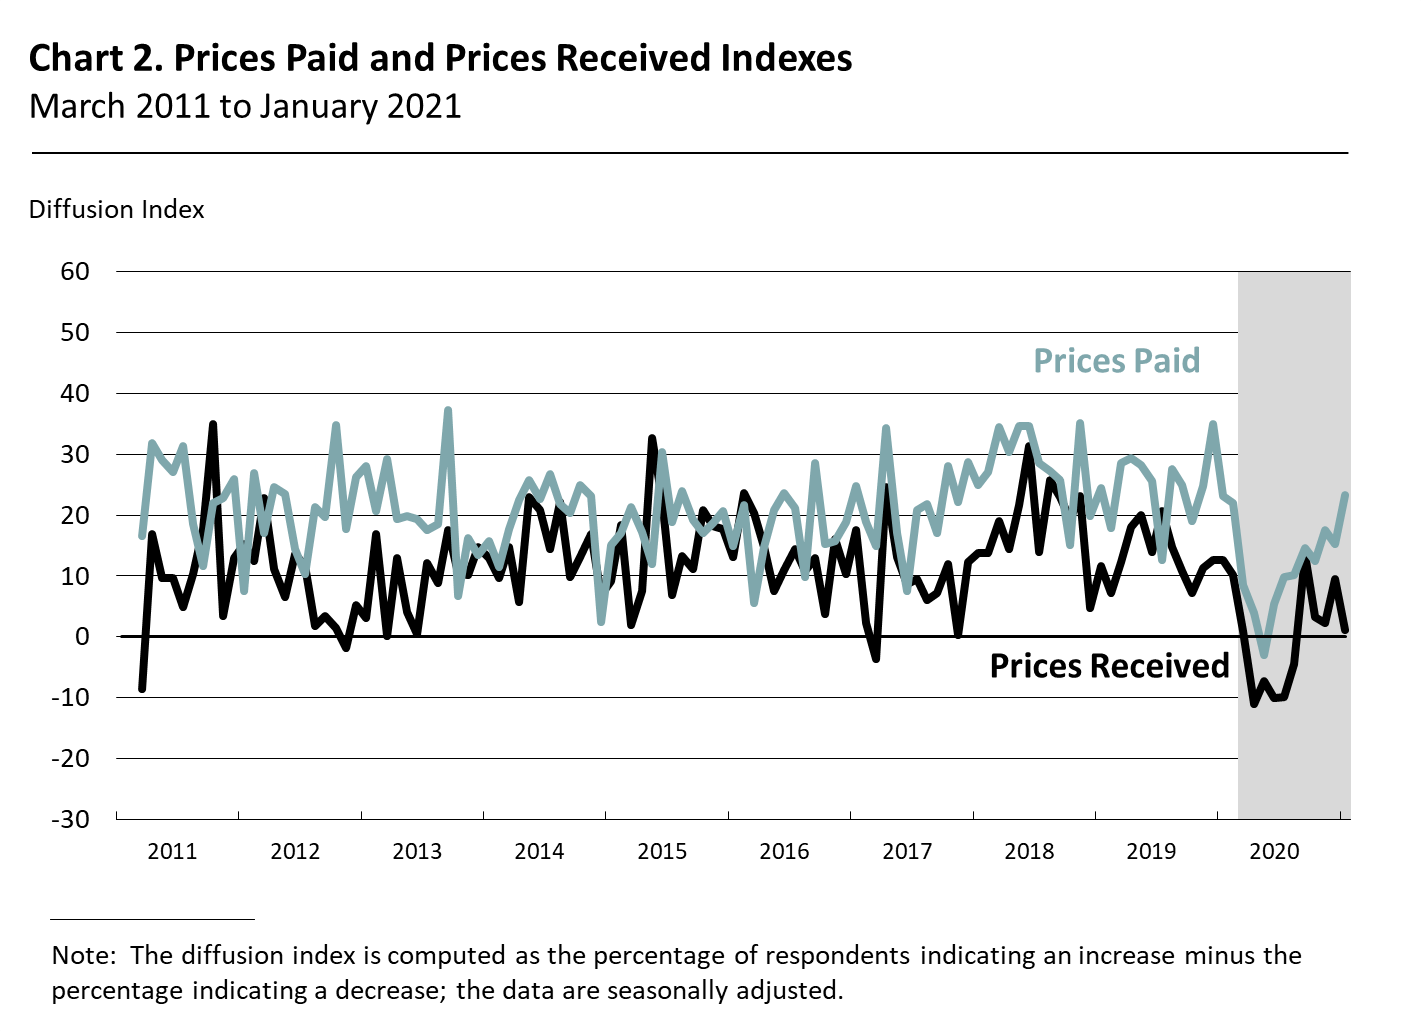 Prices Paid and Prices Received Indexes